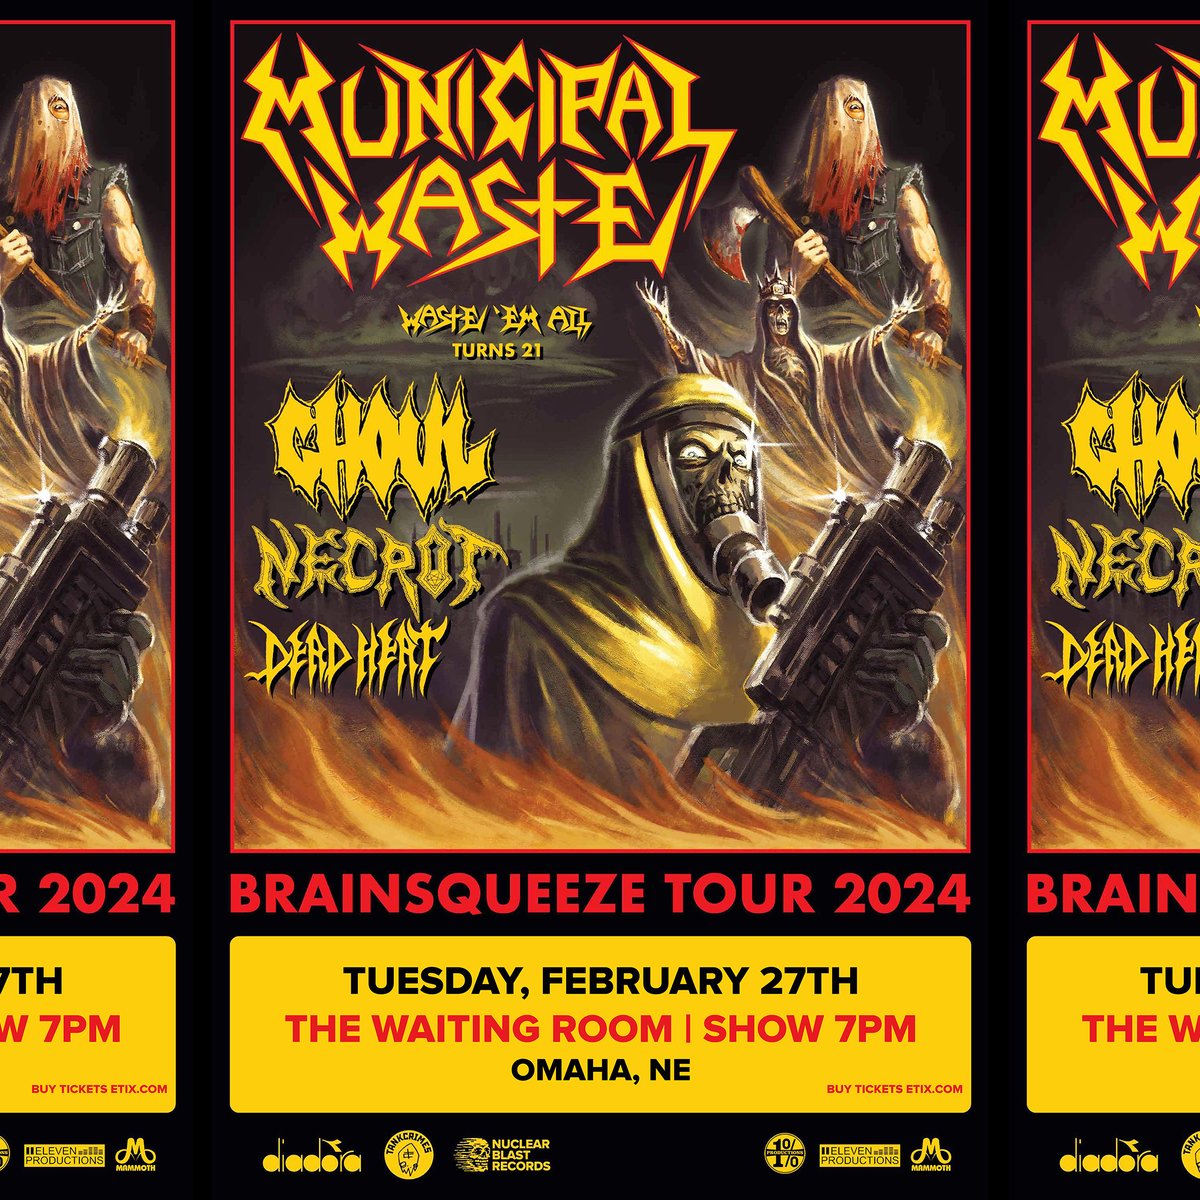 TONIGHT! See @MUNICIPALWASTE on their BRAINSQUEEZE TOUR with @GhoulOfficial, @necrot_official , and @DeadHeat805 LIVE at The Waiting Room 🎫 etix.com/ticket/p/46253…